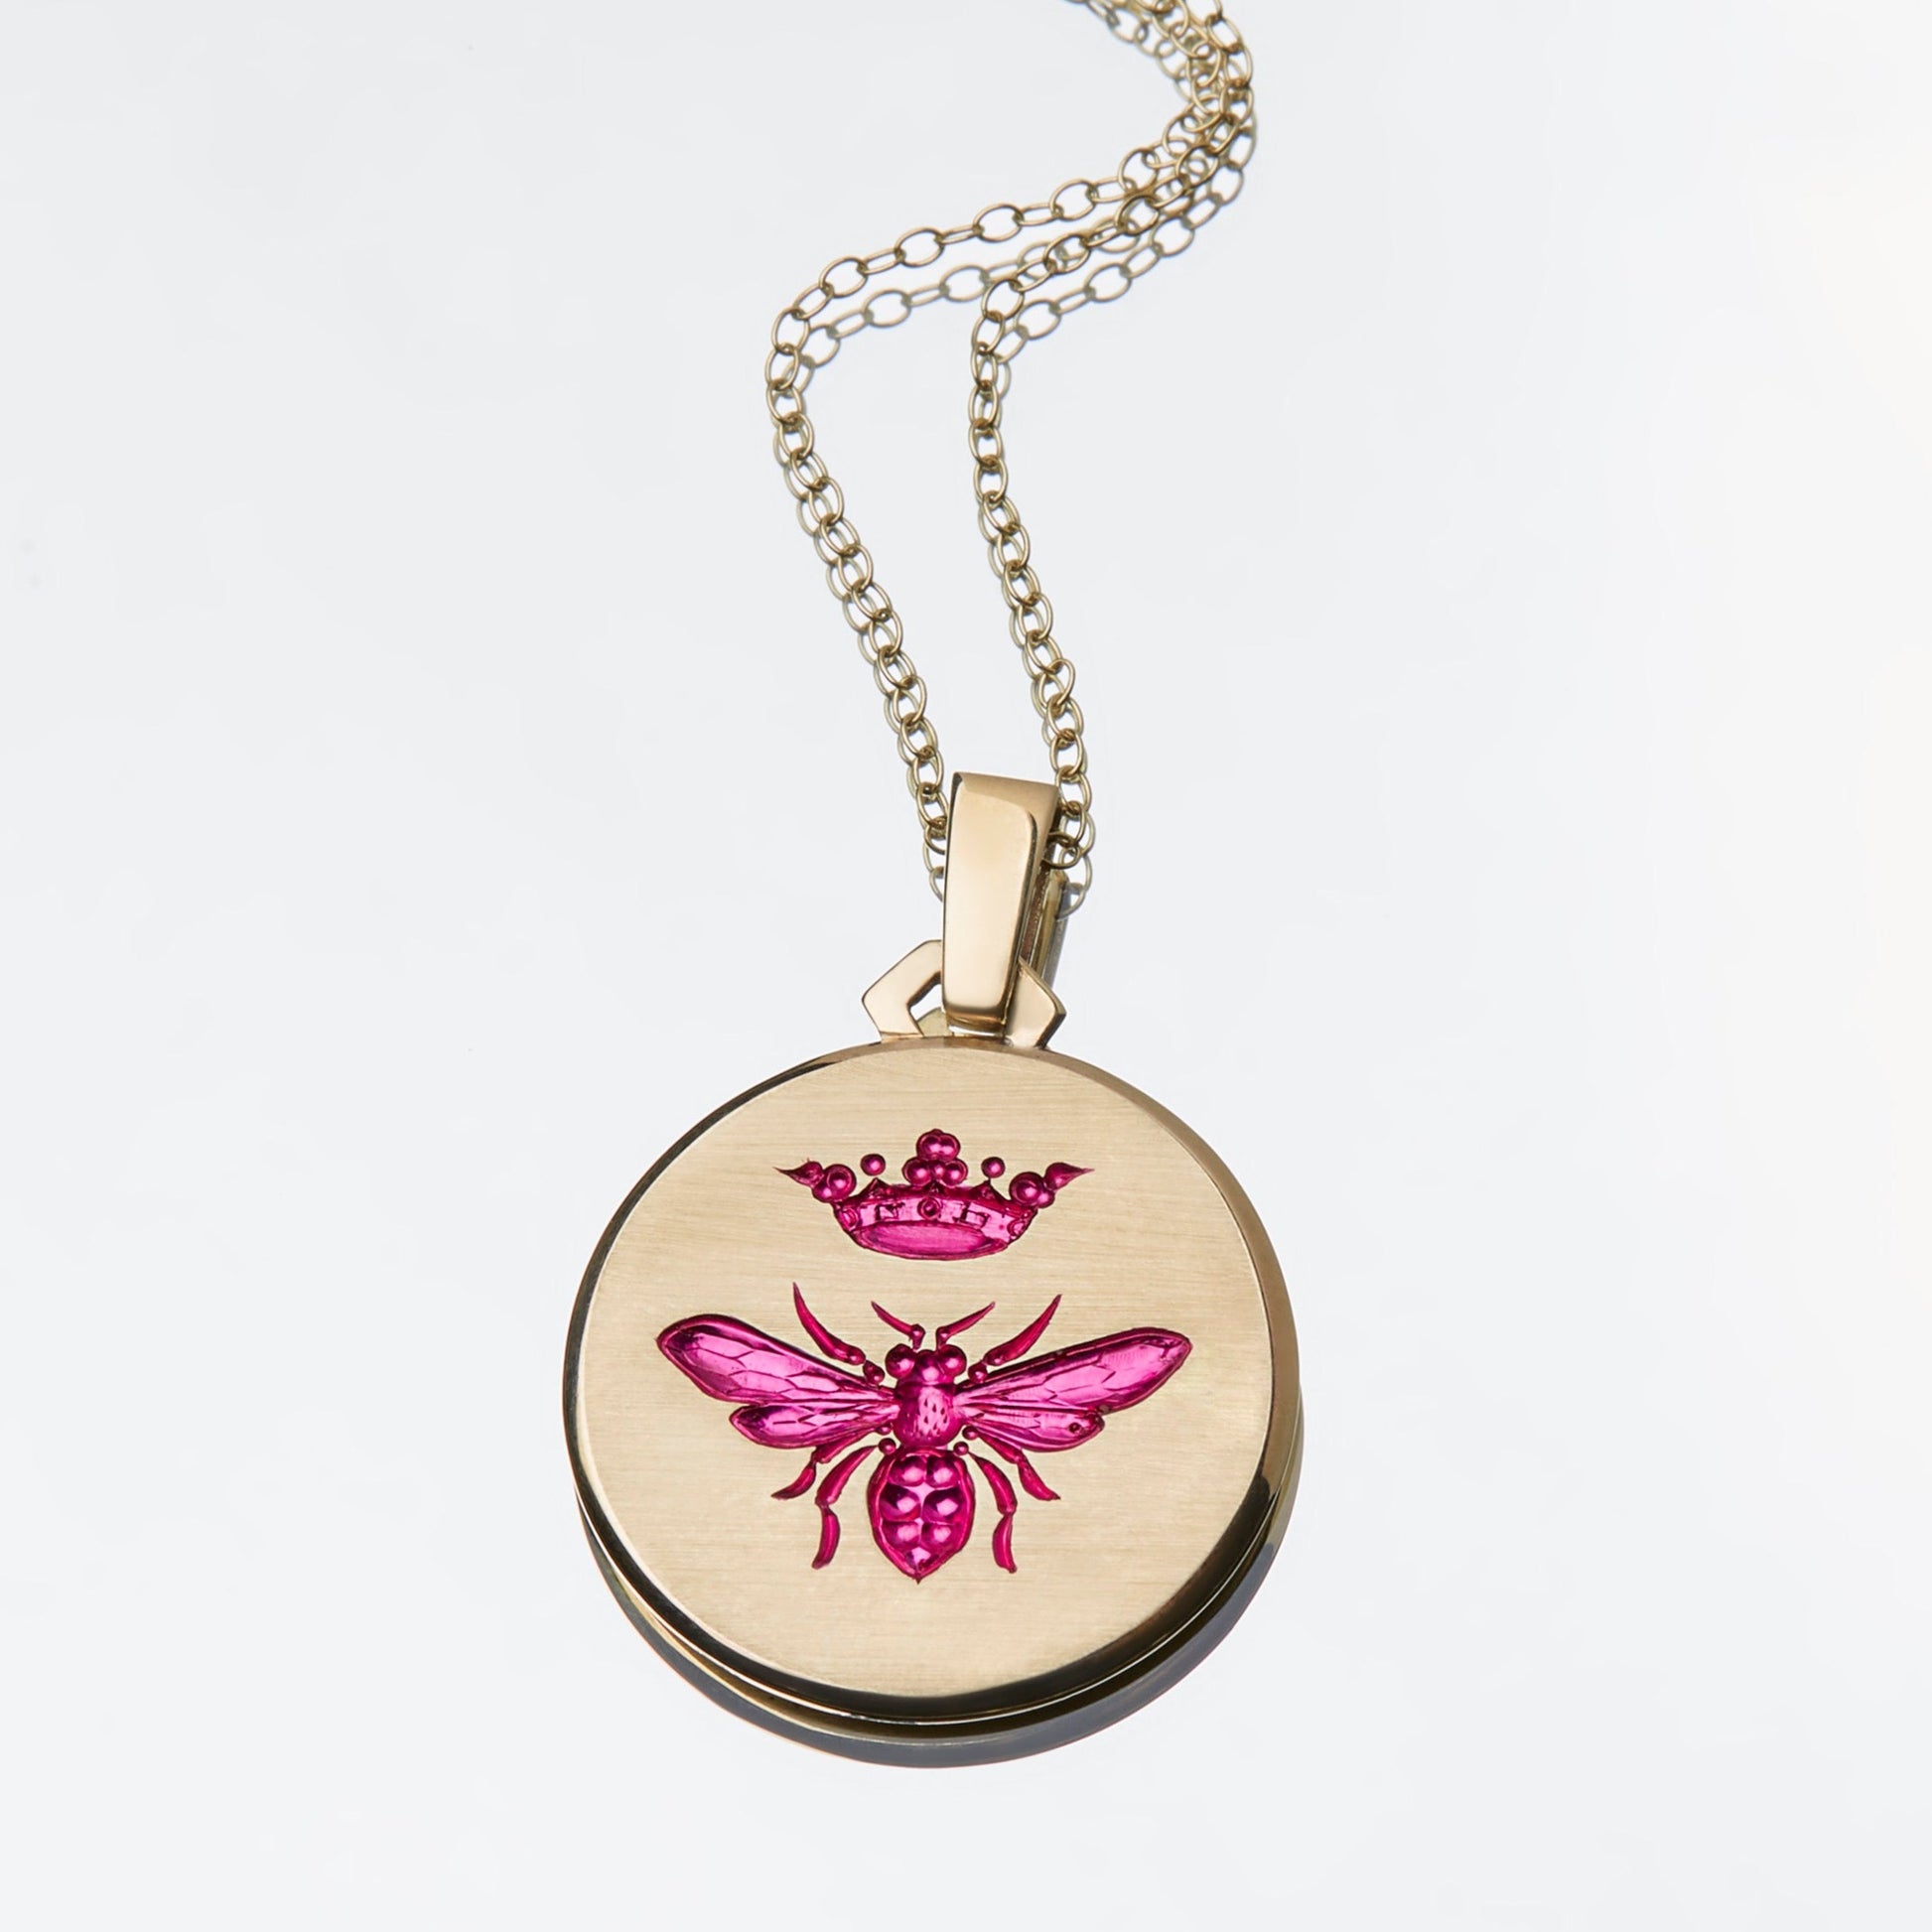 Castro Smith Jewelry hand engraved gold pendants for women with bee and crown design